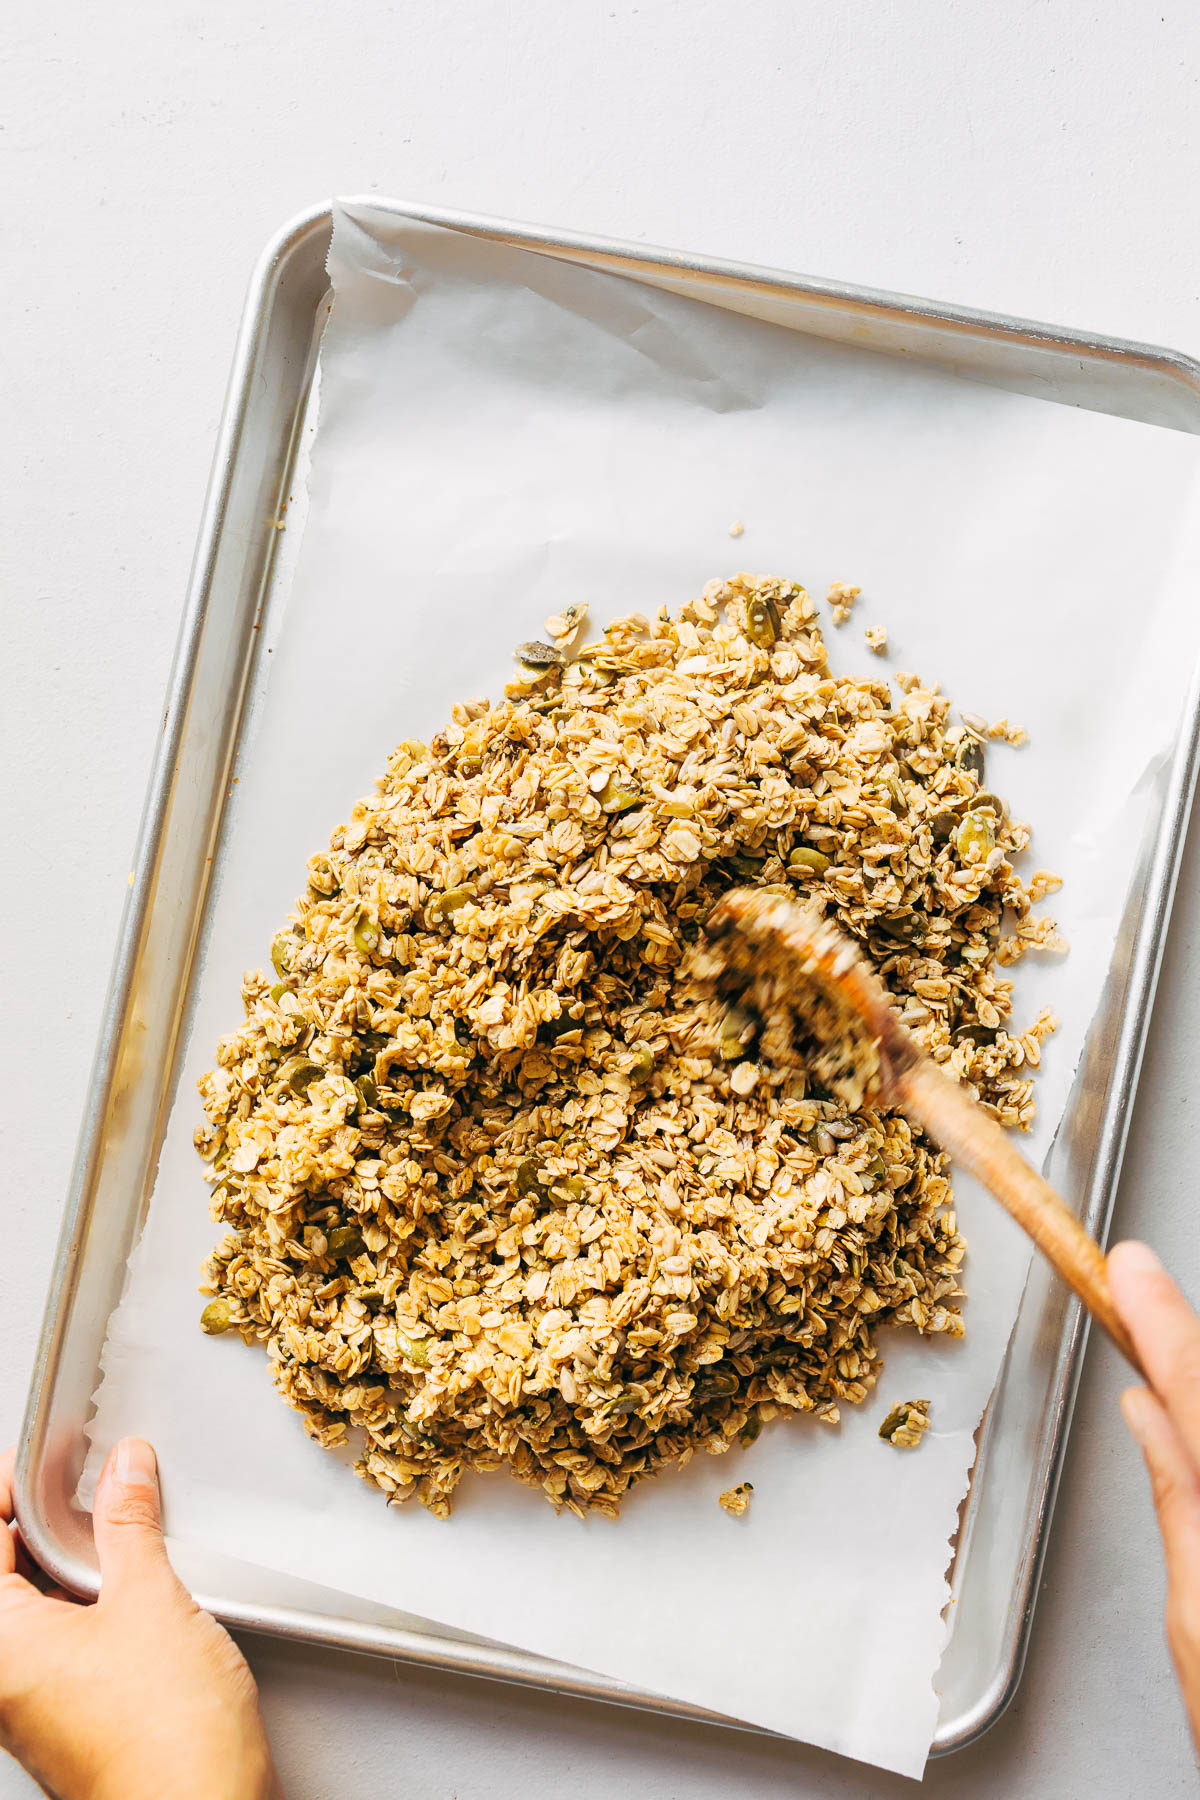 A hand spreading unbaked granola onto a parchment-paper lined baking sheet.